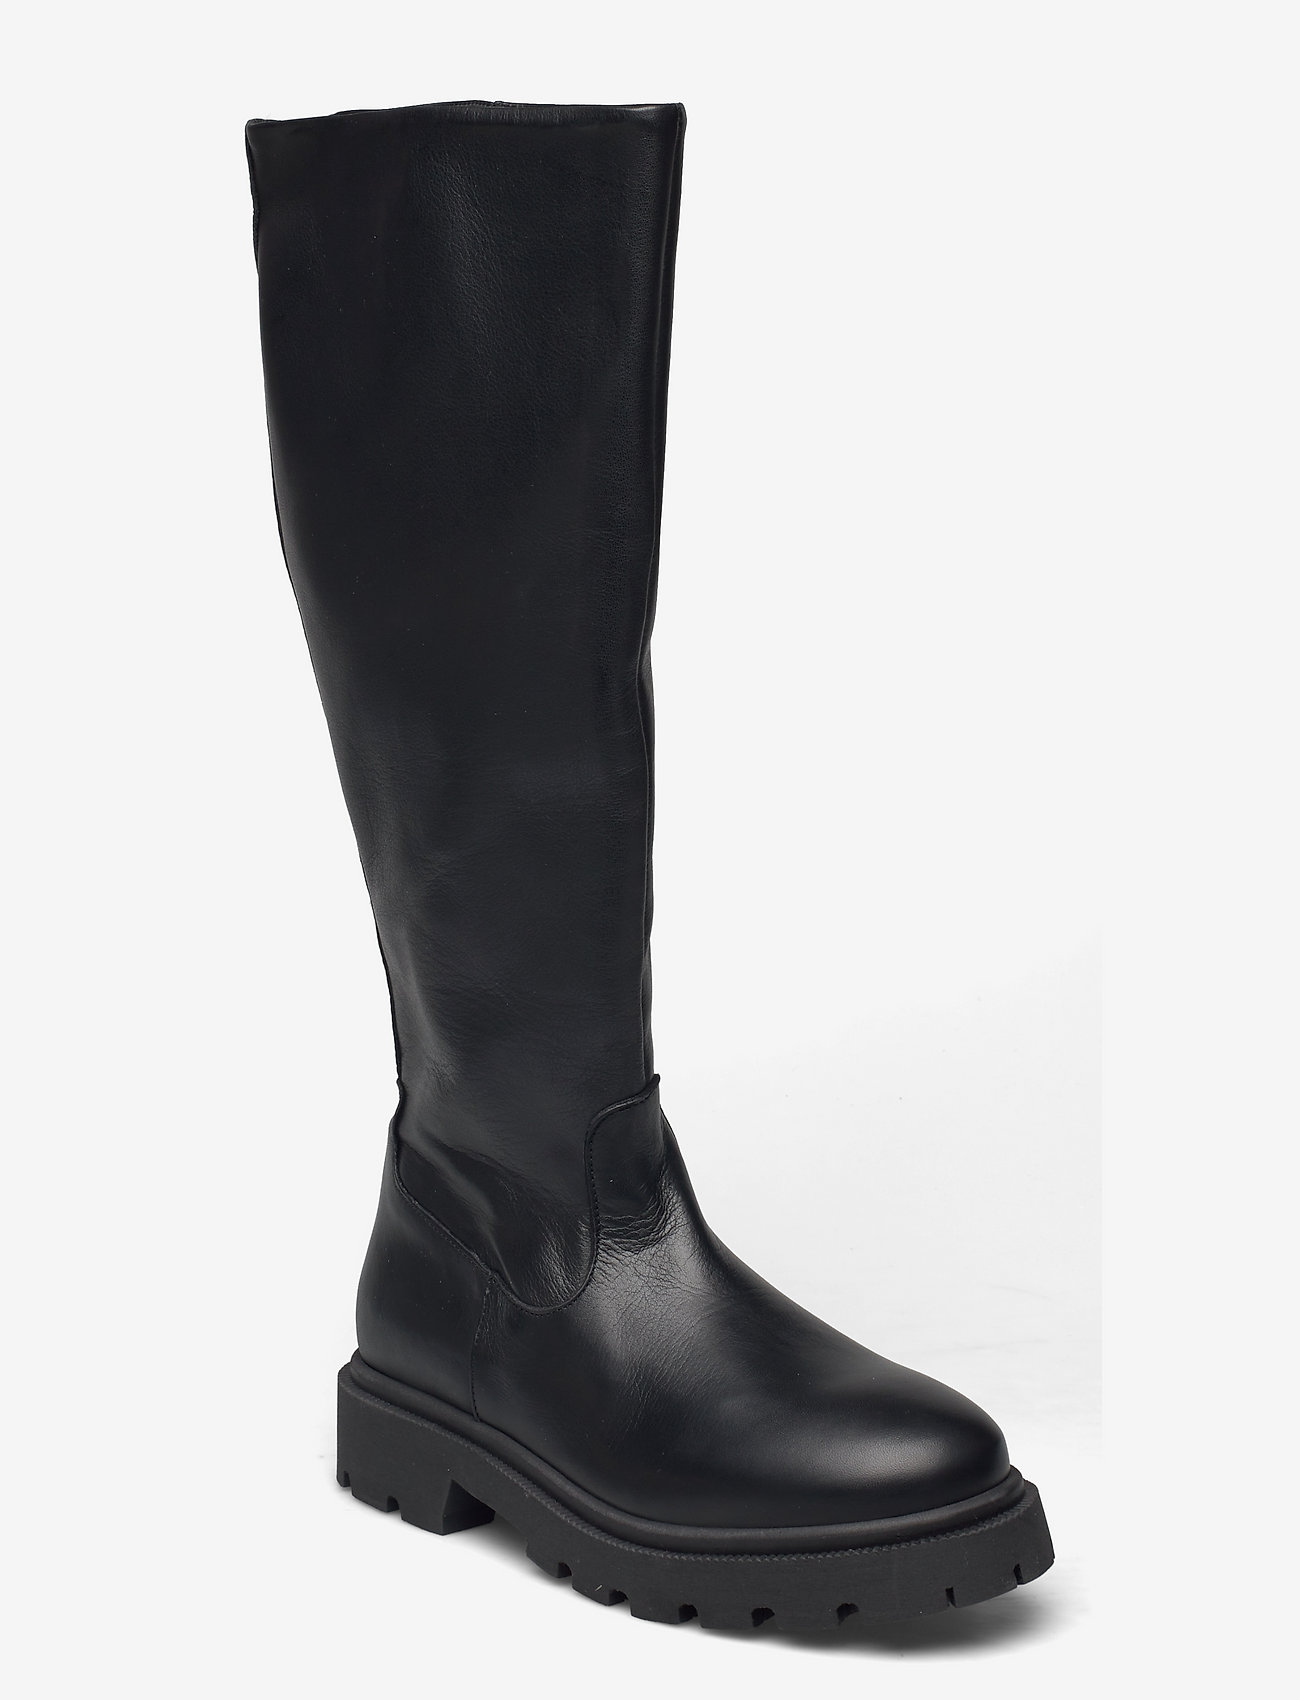 Selected Femme - SLFEMMA HIGH SHAFTED LEATHER BOOT B - ilgaauliai - black - 0